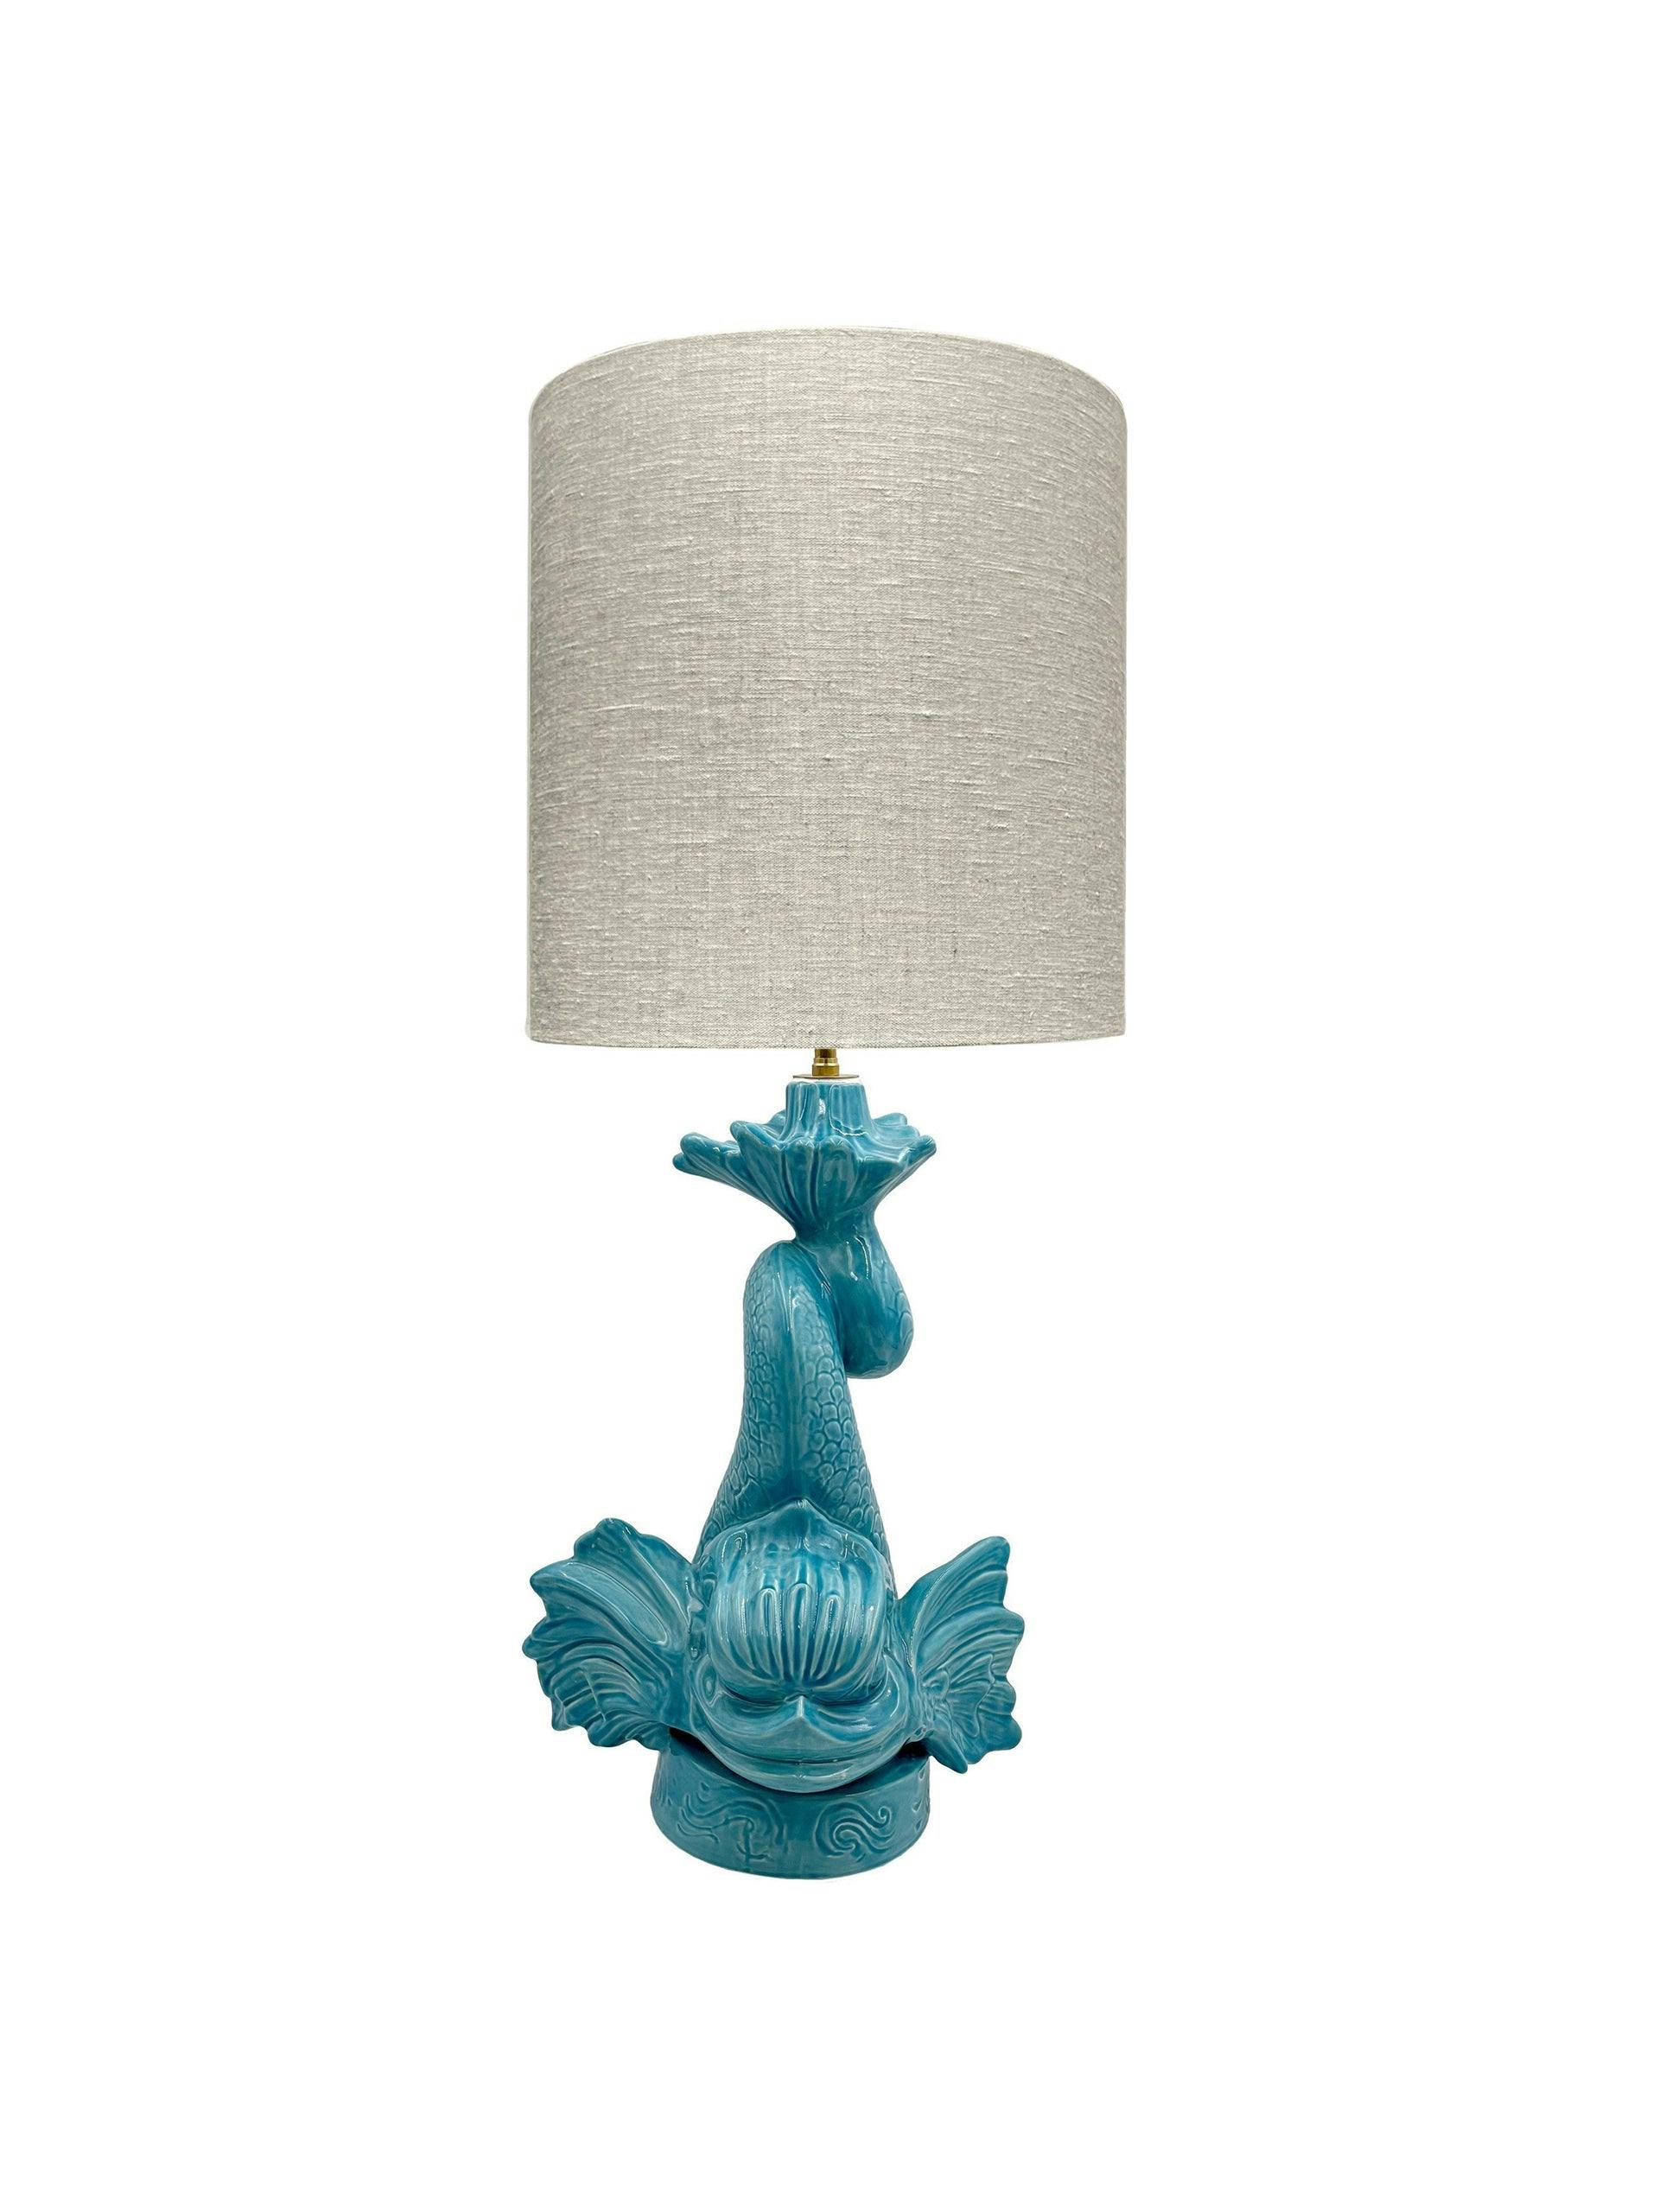 Dolphin lamp base in turquoise